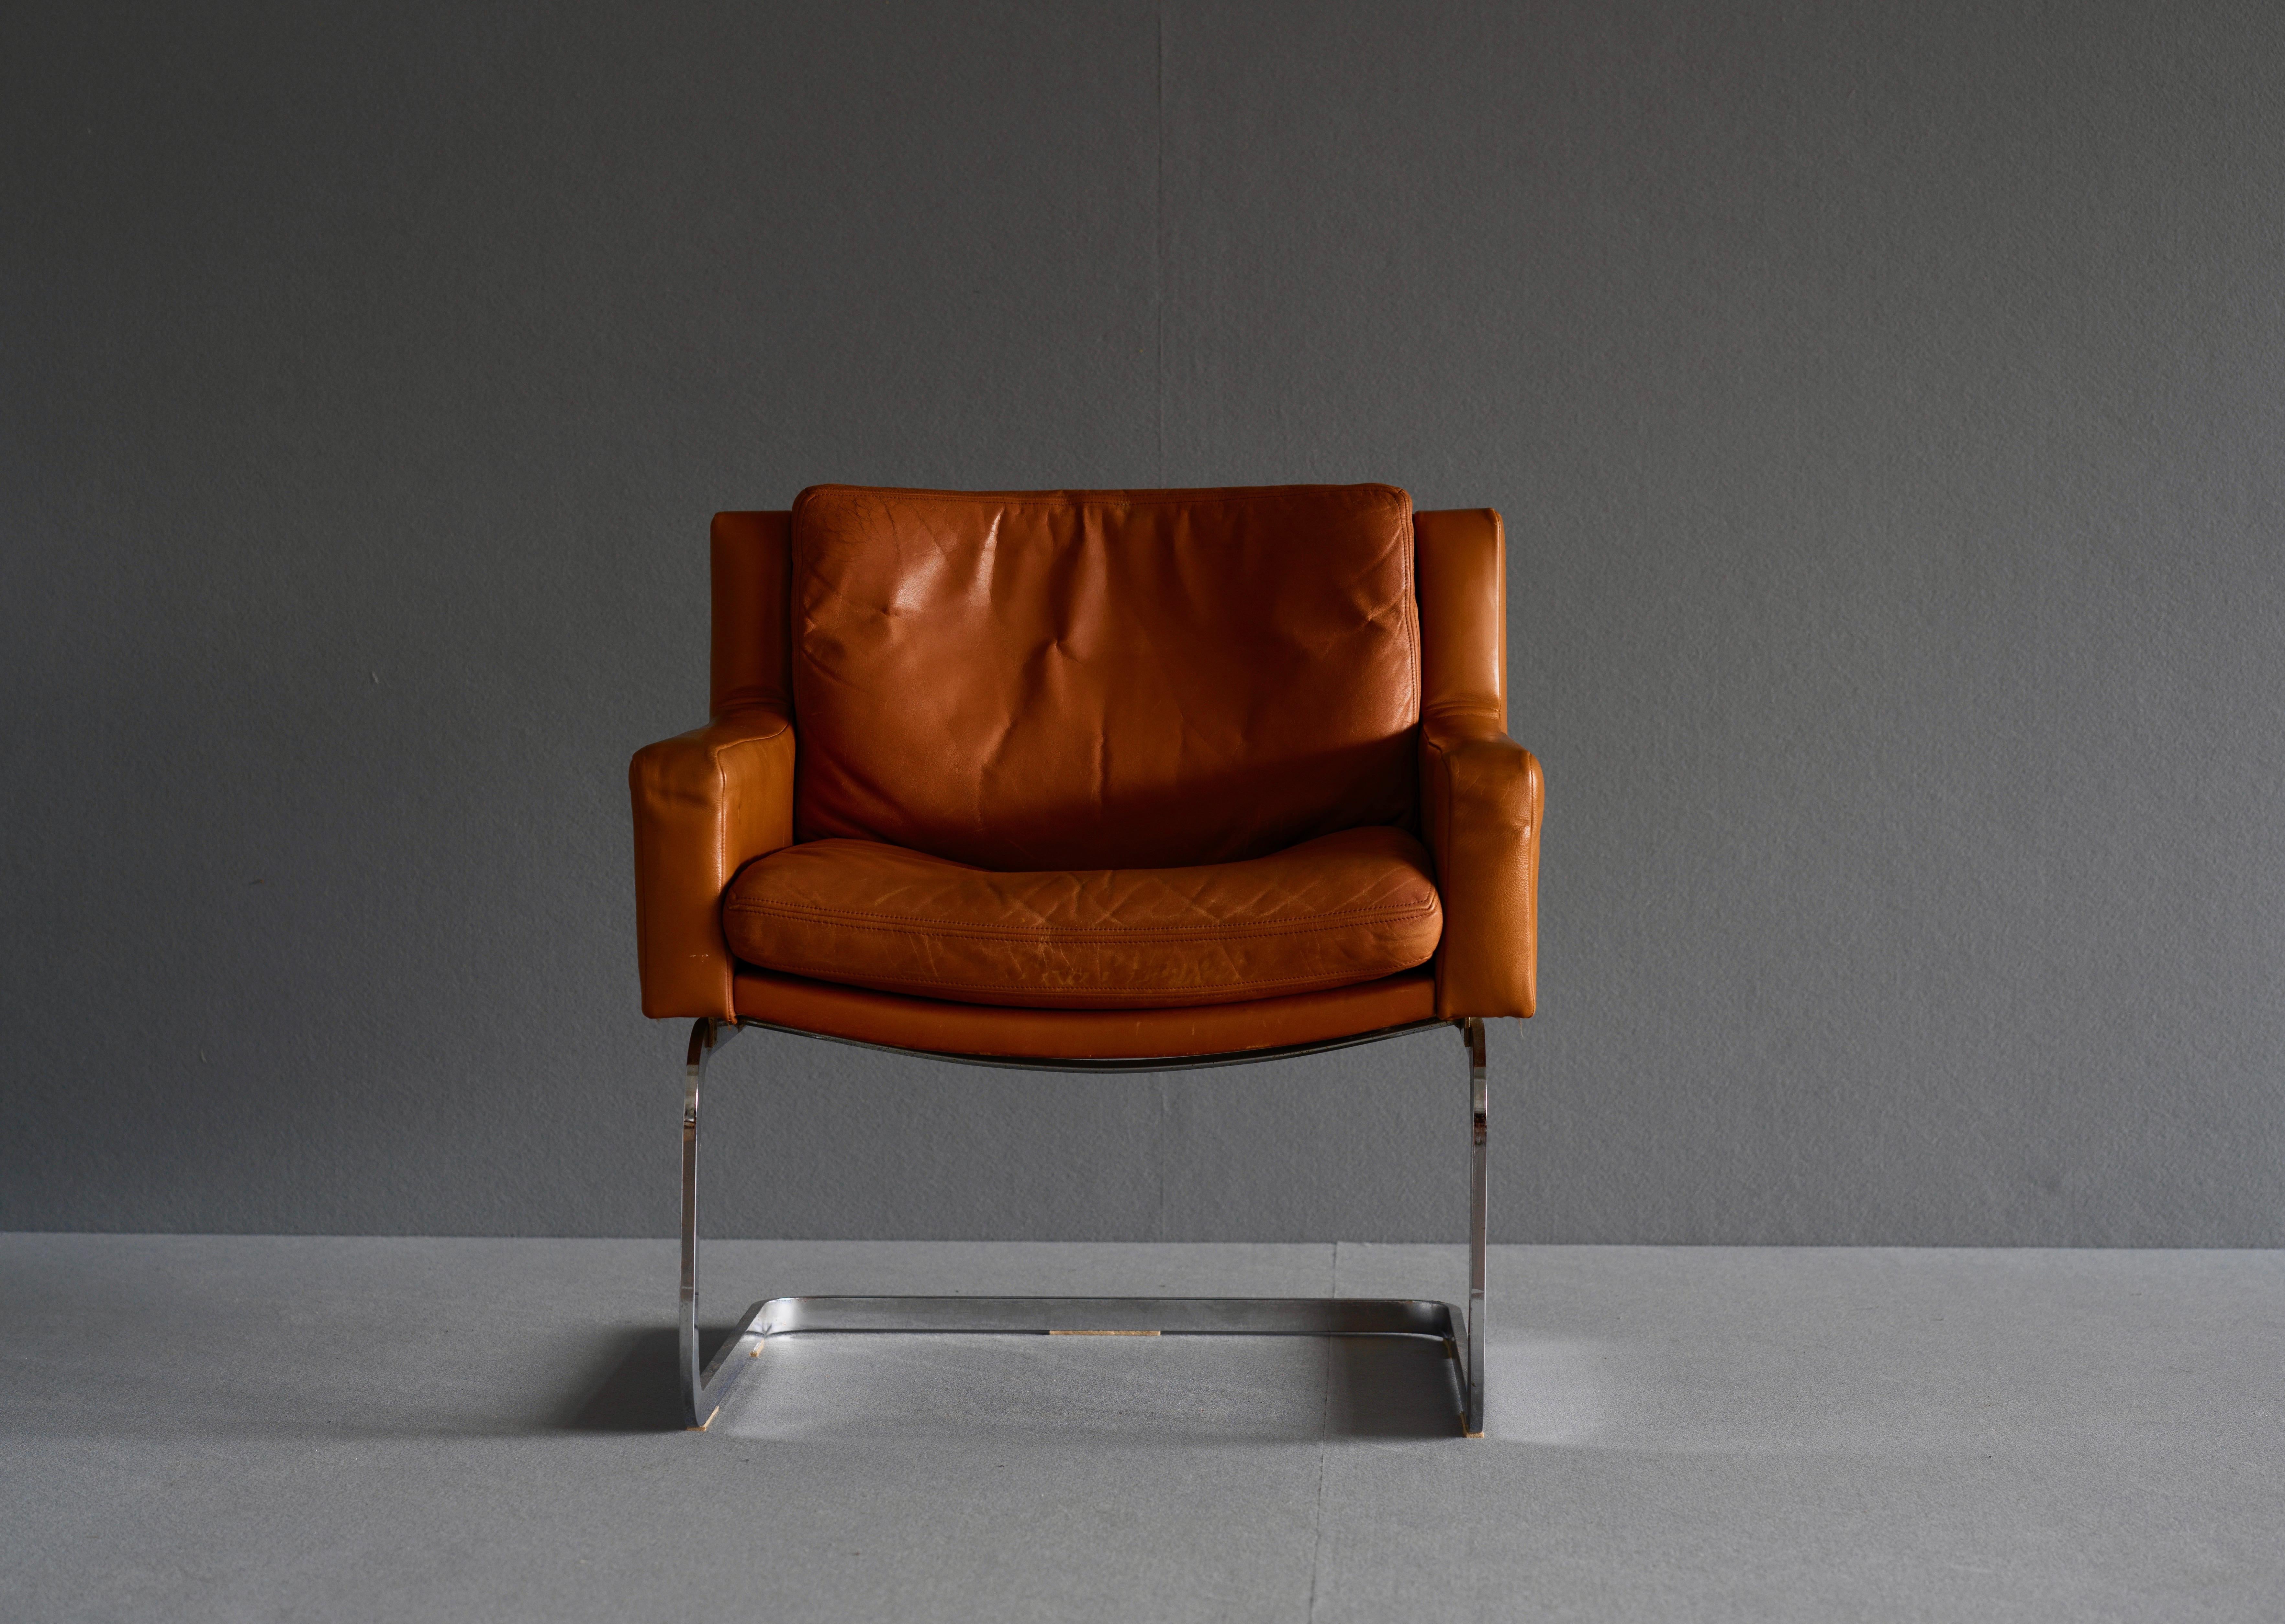 Armchairs designed by Roberts Haussmann for De Sede. The chairs feature a cantilever design and have a chromed steel frame. They are upholstered in fabulously patinated cognac leather. As with all De Sede pieces the chairs feature top quality